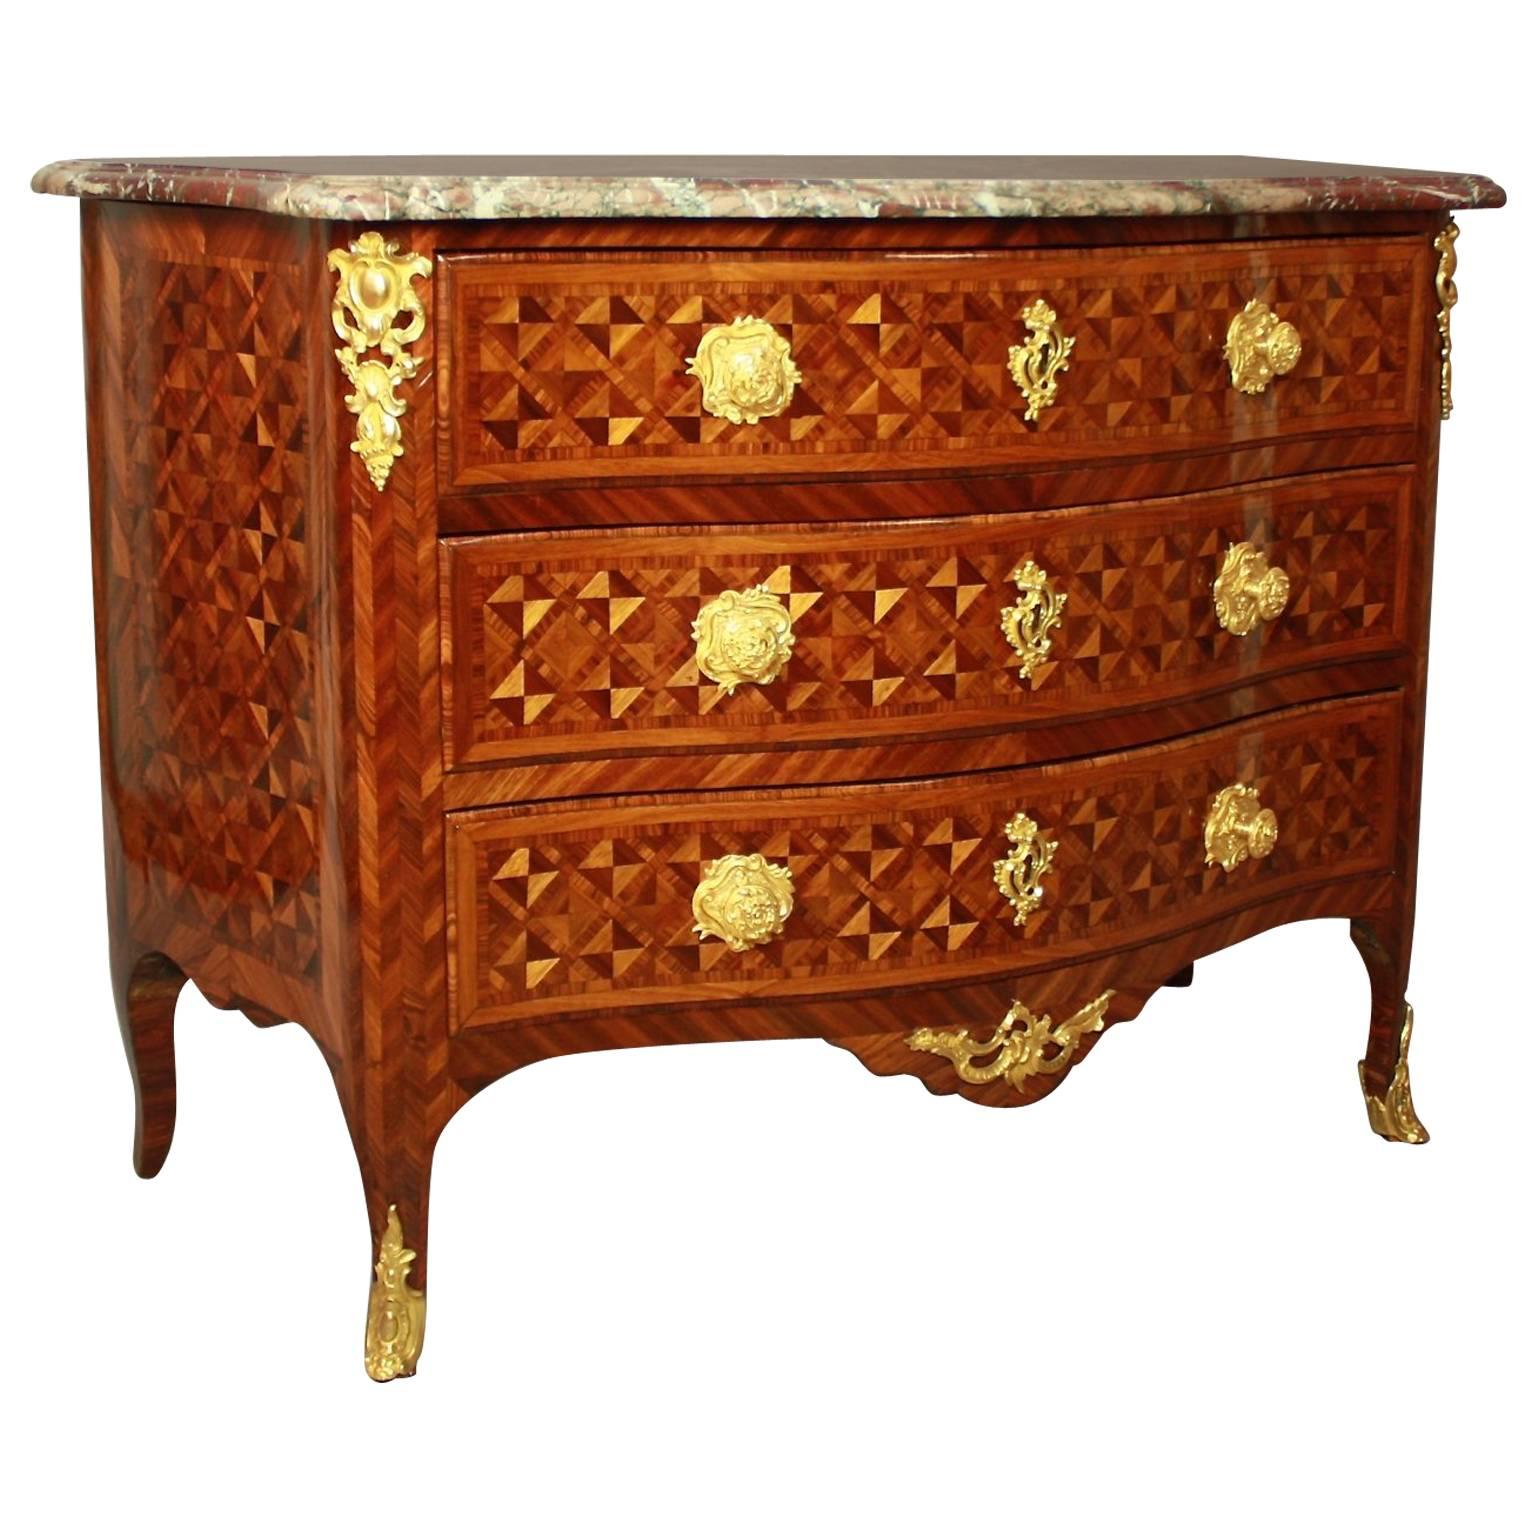 Louis XV Commode or Chest of Drawers, Stamped 'Mondon'